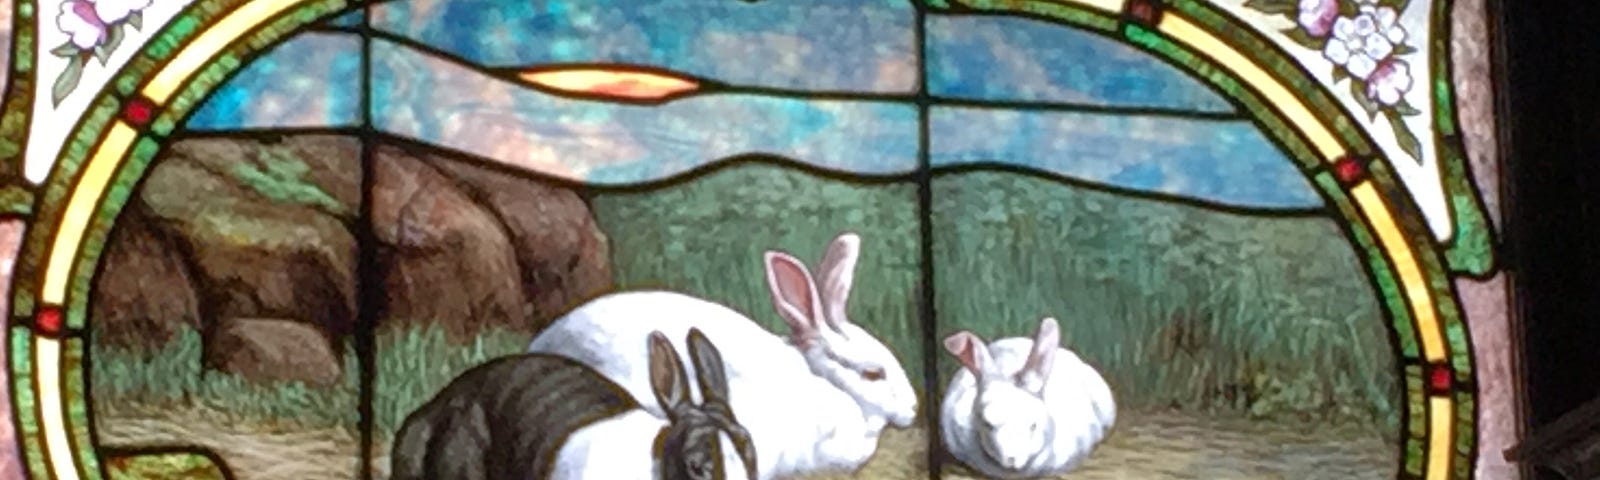 Stained glass window featuring three rabbits — one black and white, and two all-white — with carrots on the ground near them